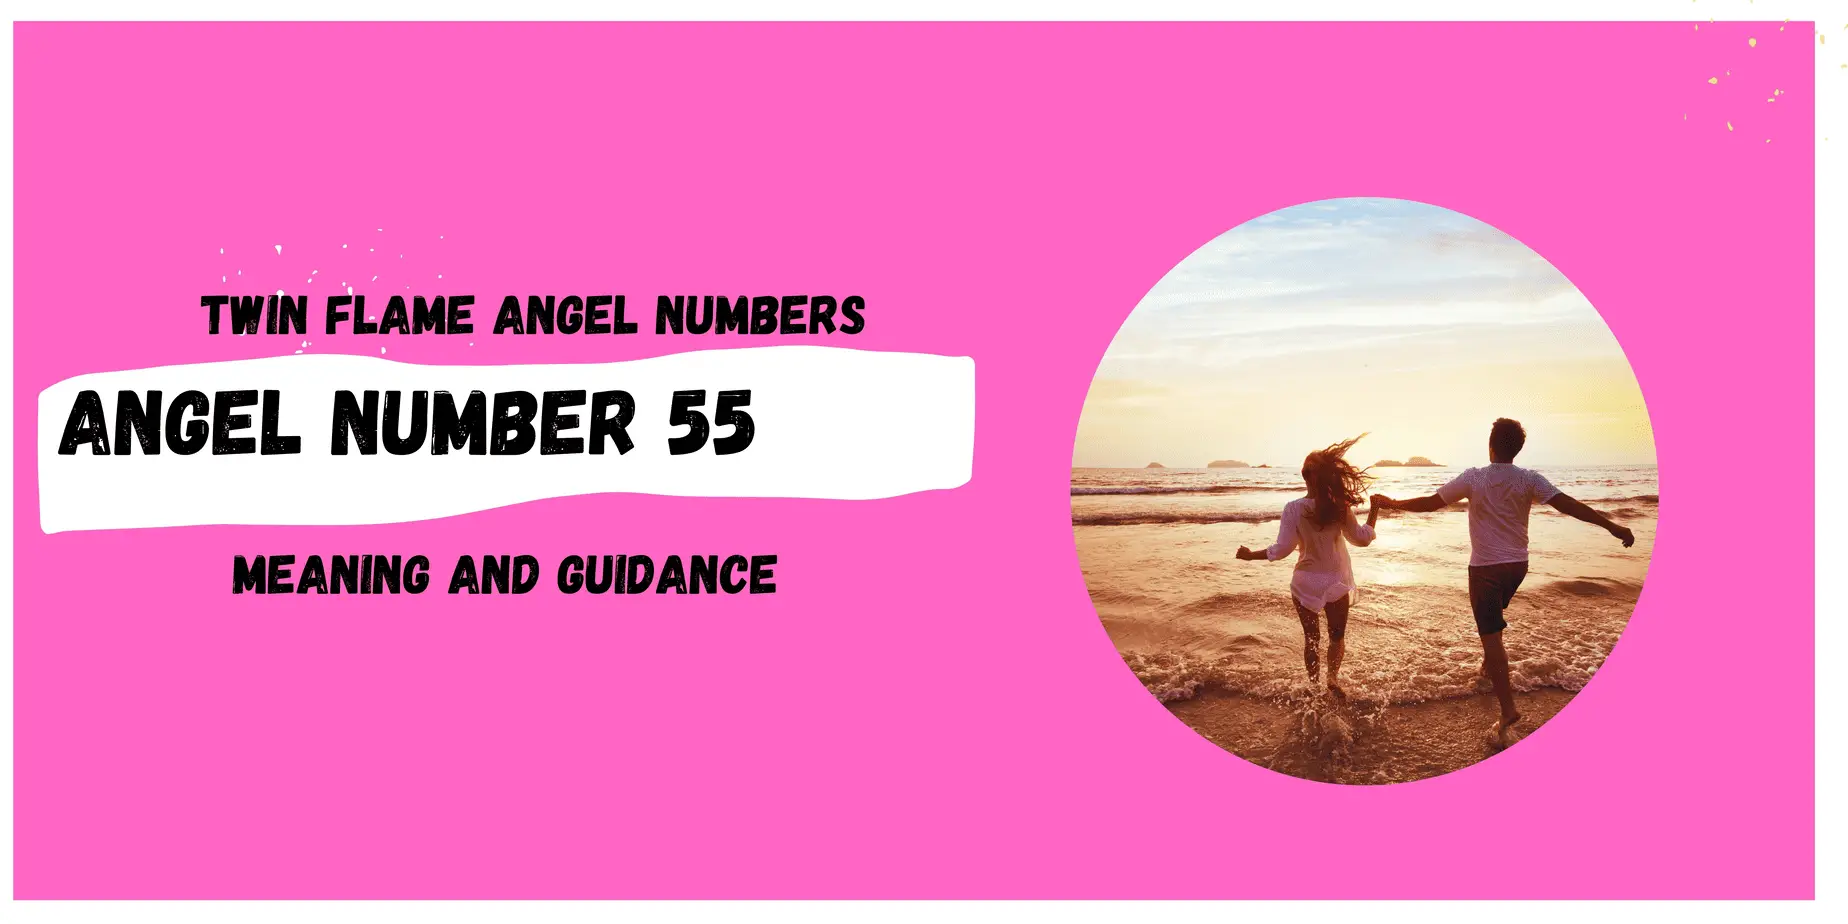 What Is The Connection Between The Angel Number 55 And Twin Flames?